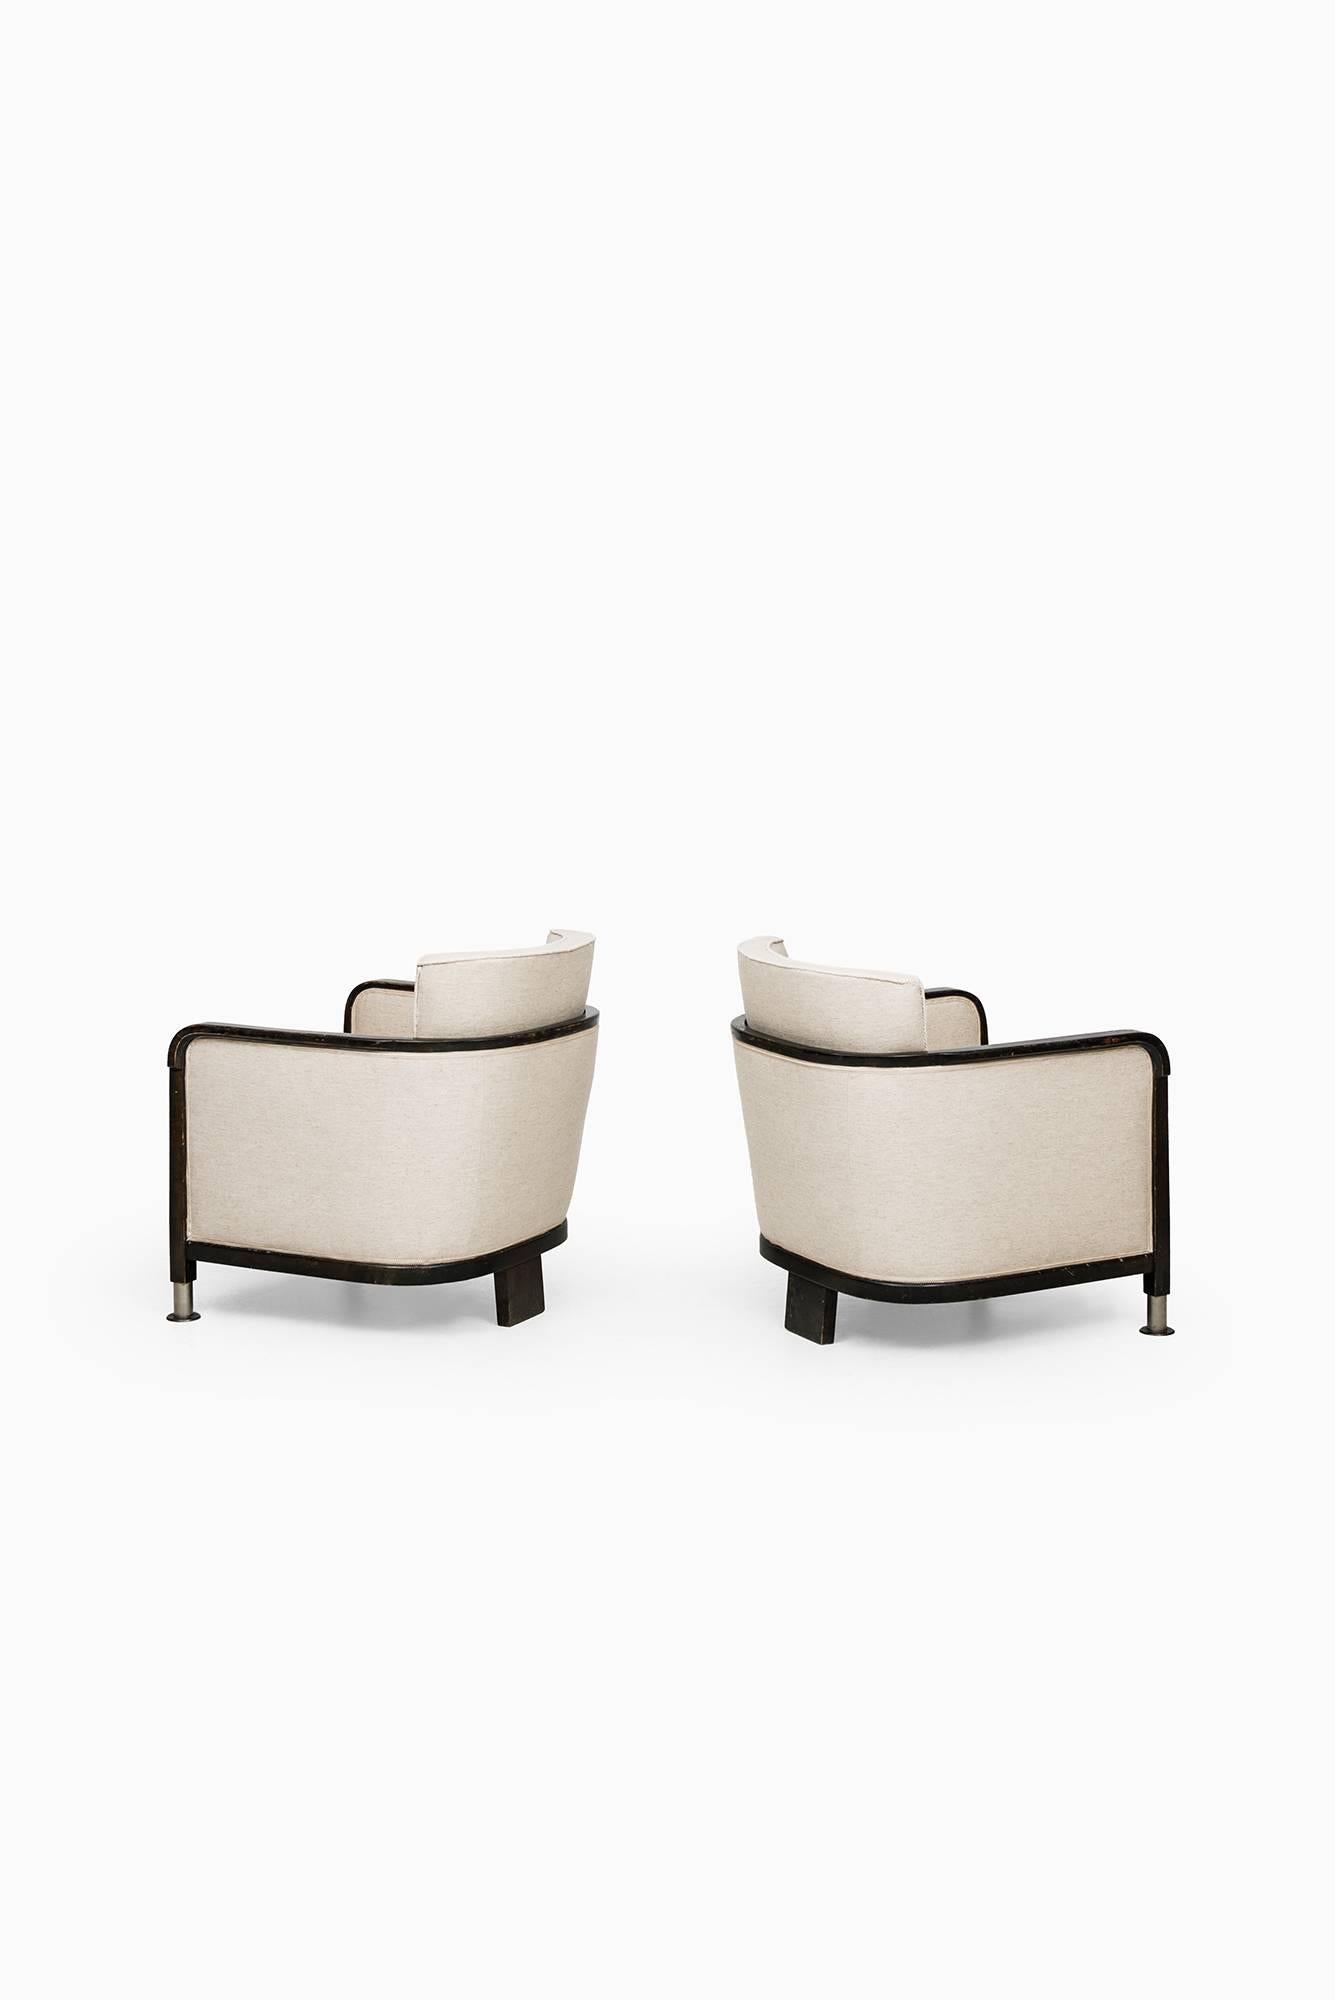 Swedish Otto Schulz Easy Chairs by Boet in Sweden